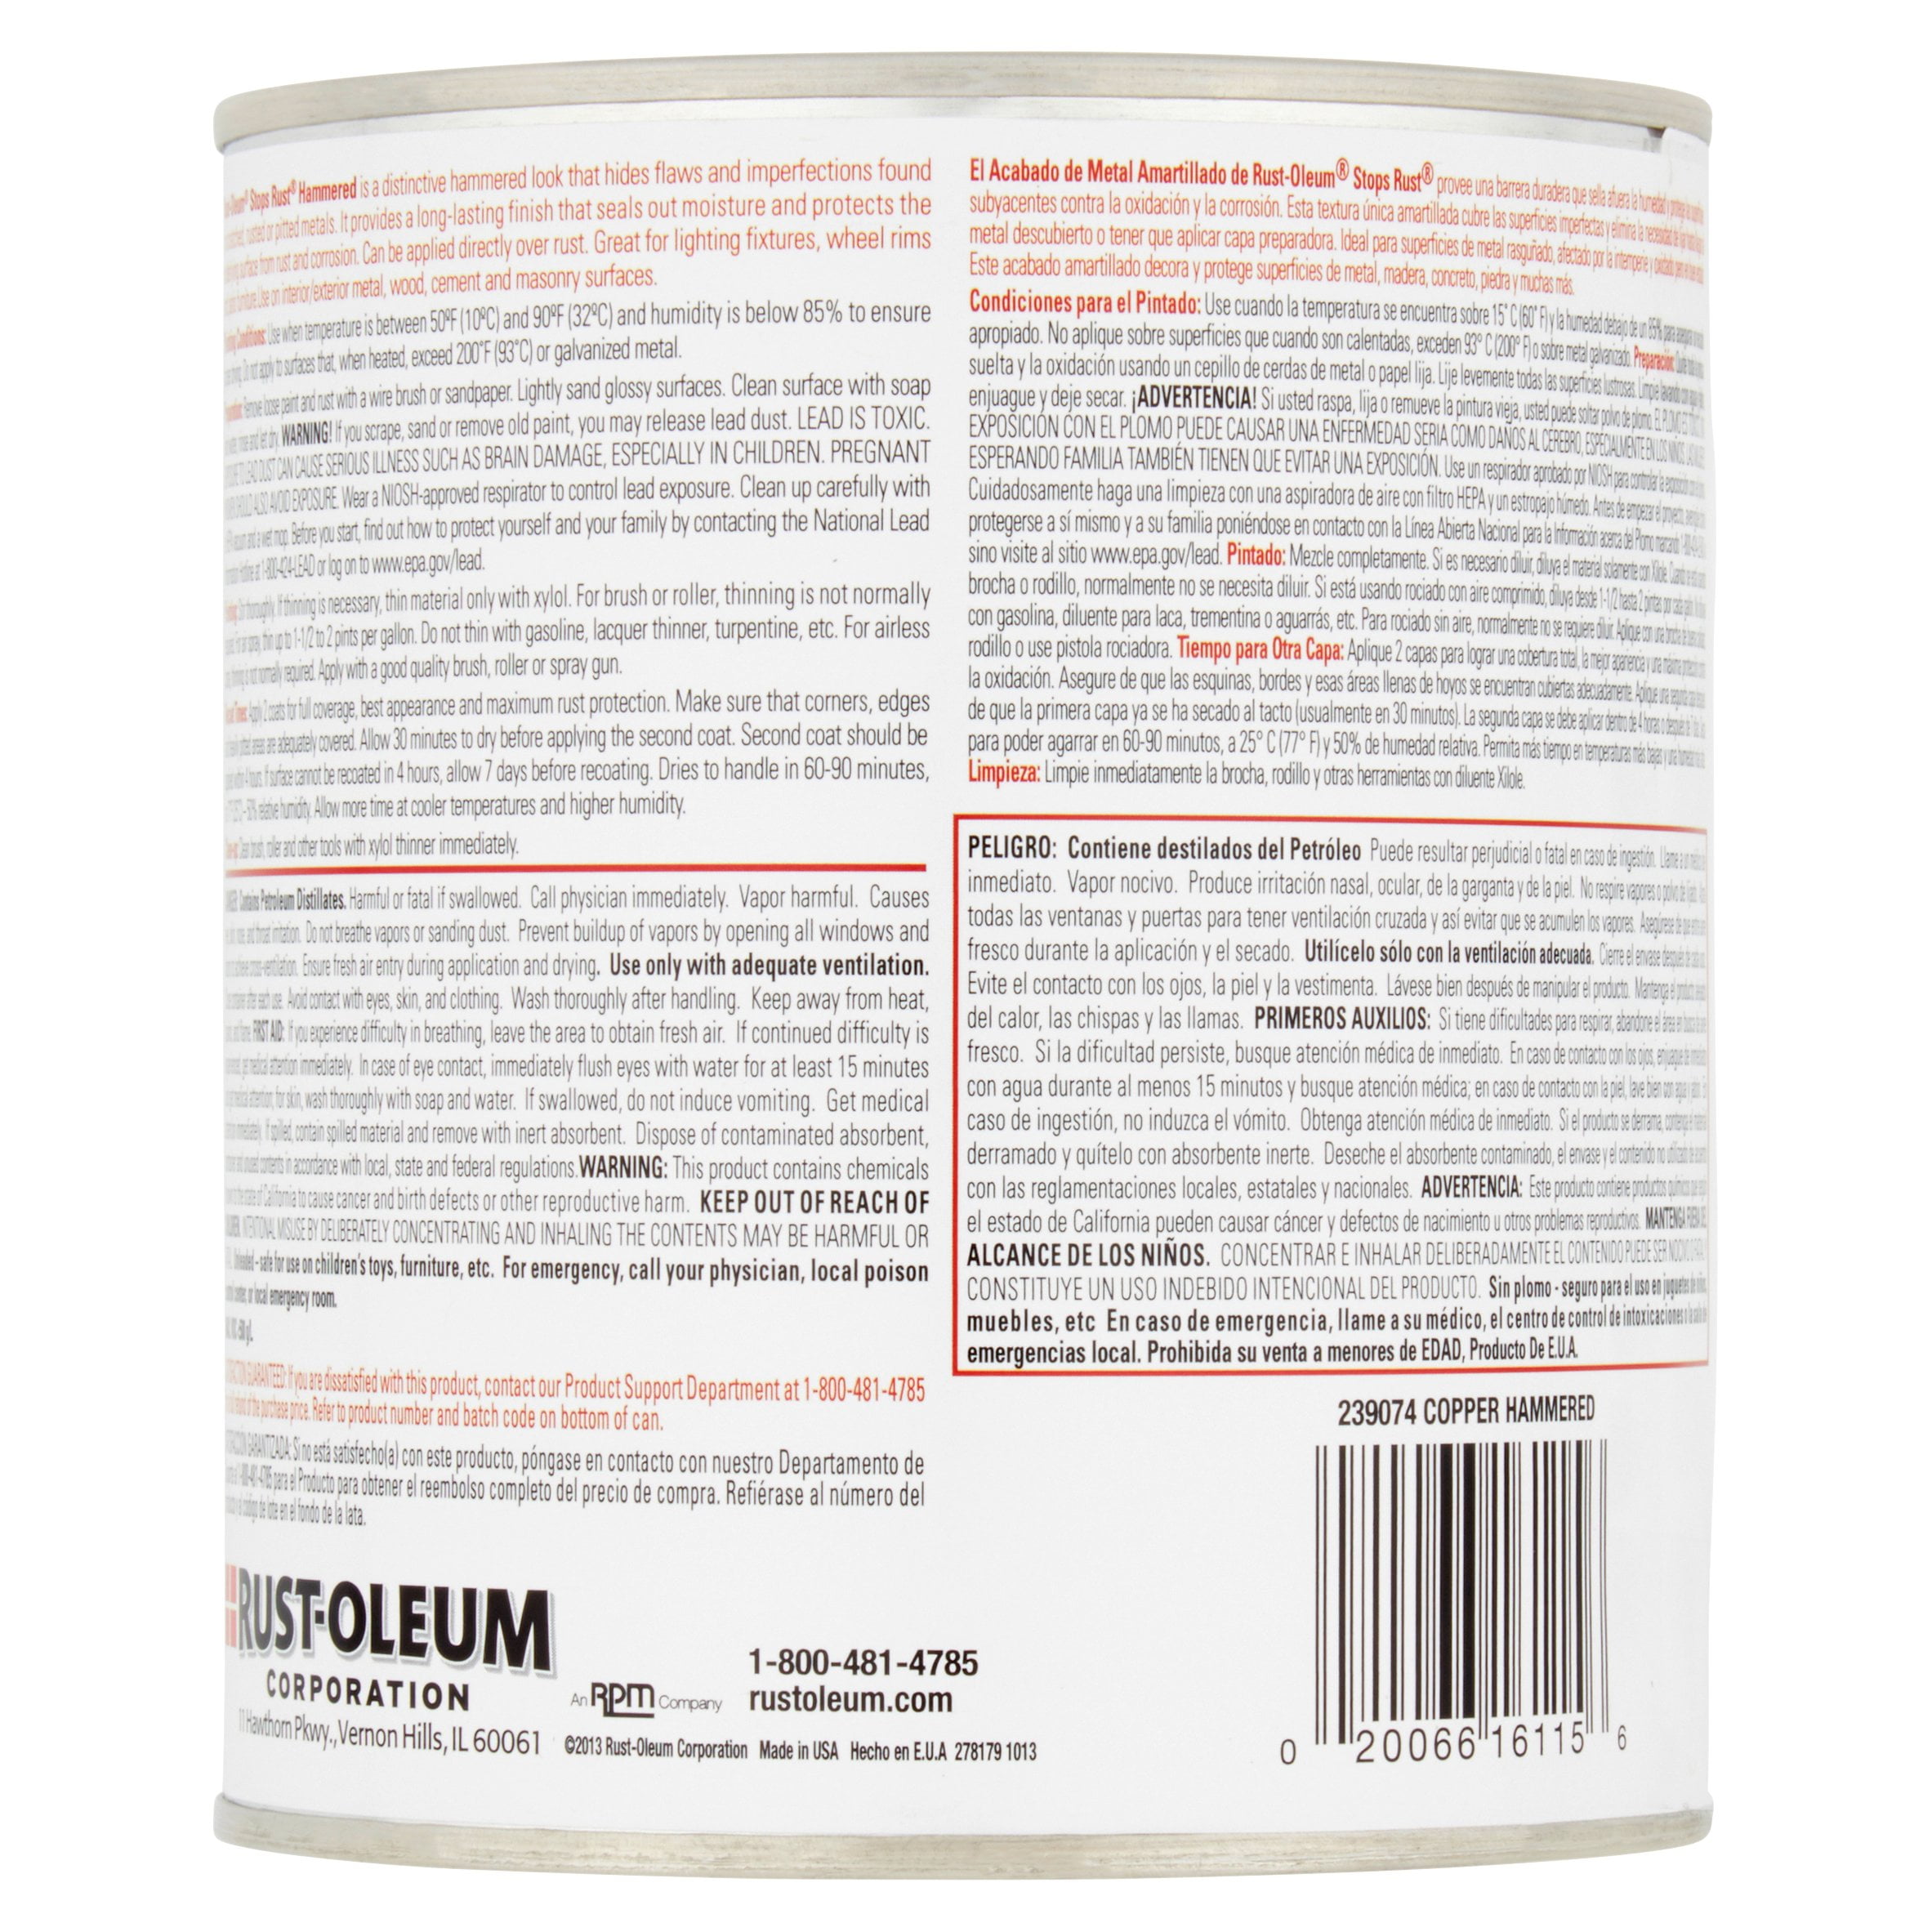 Rust-Oleum Stops Rust Hammered Paint, Copper, 1 Qt. - Town Hardware &  General Store